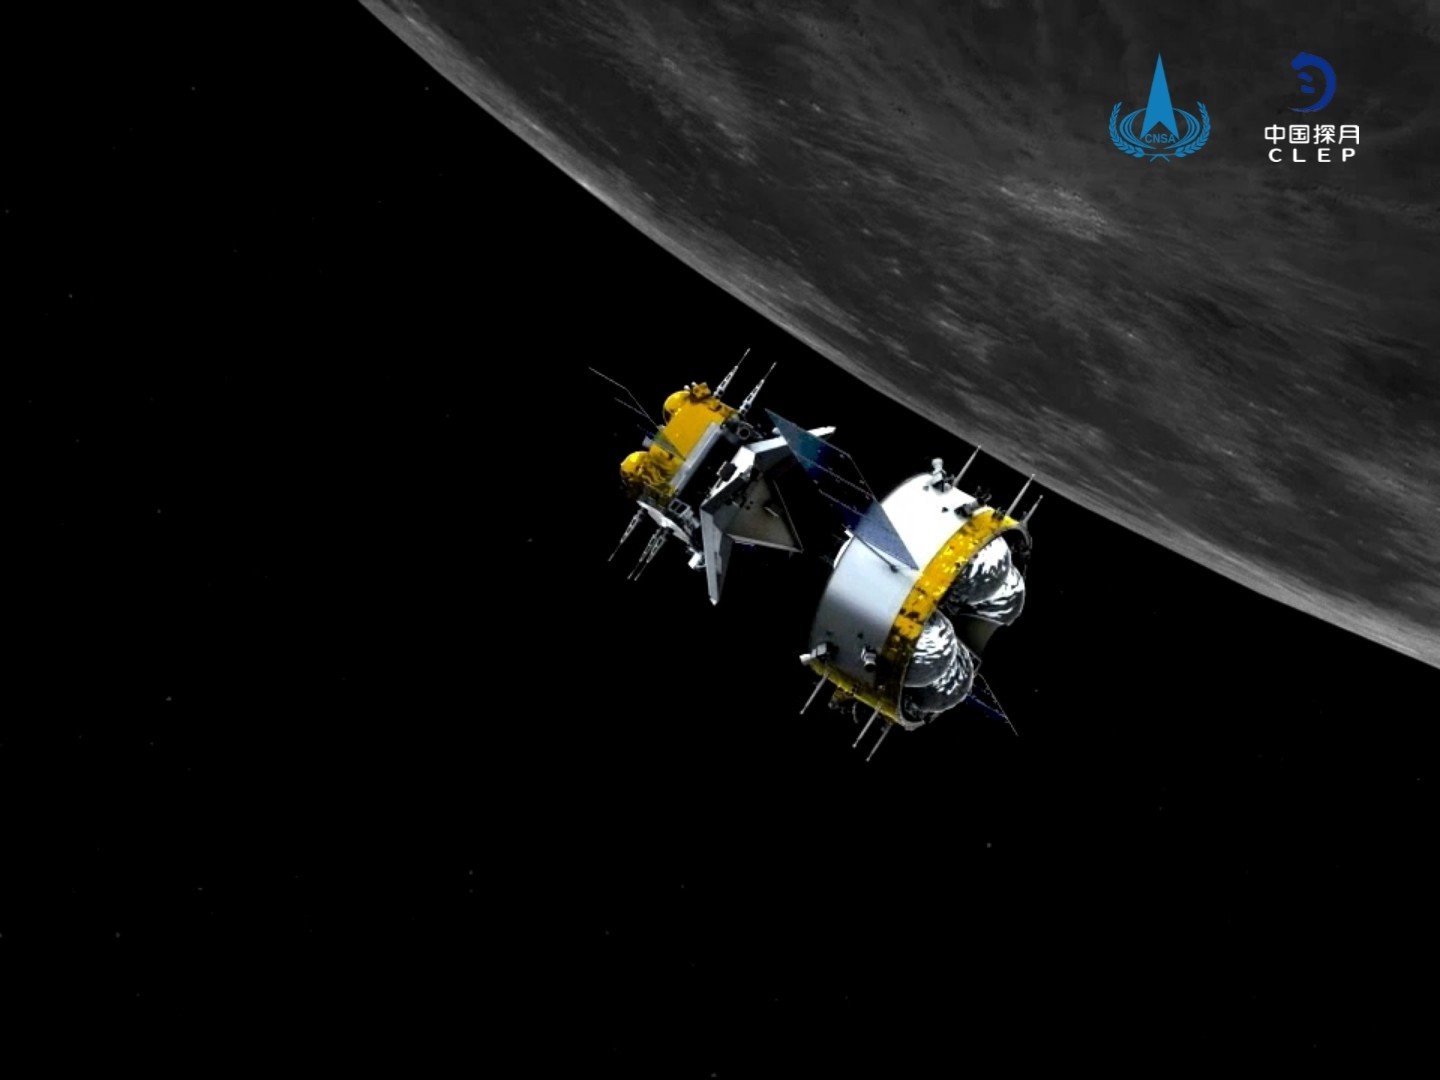 A graphic simulation showing the orbiter and returner combination of China’s Chang’e 5 mission, which retrieved the Earth’s first lunar samples in more than 40 years. Illustration: Xinhua